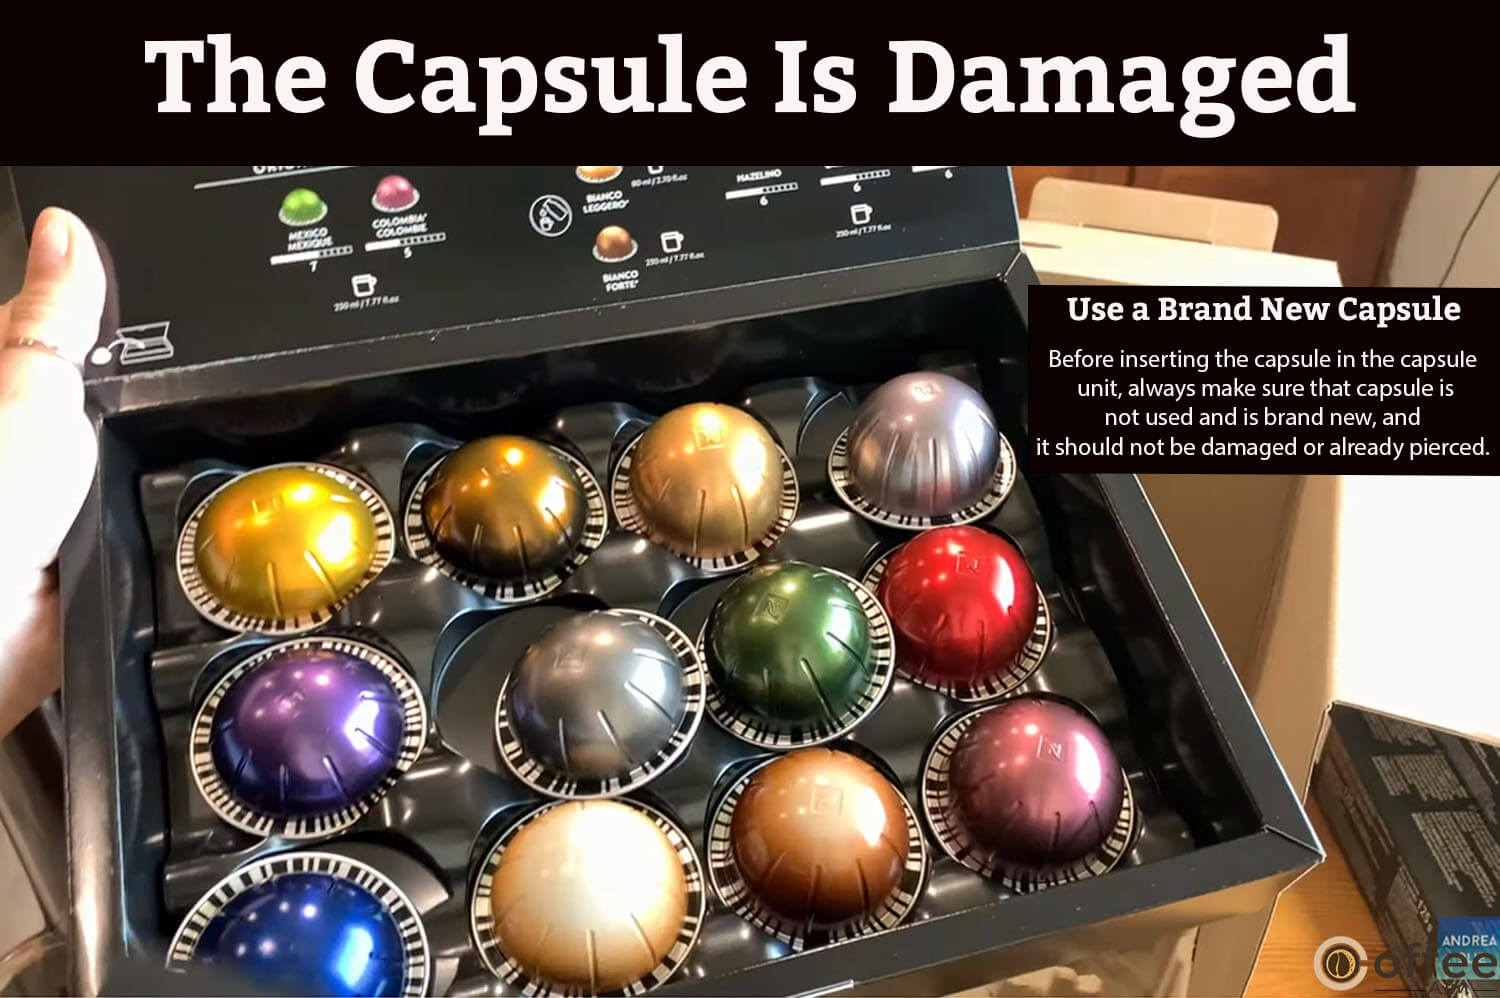 Use a Brand New Capsule